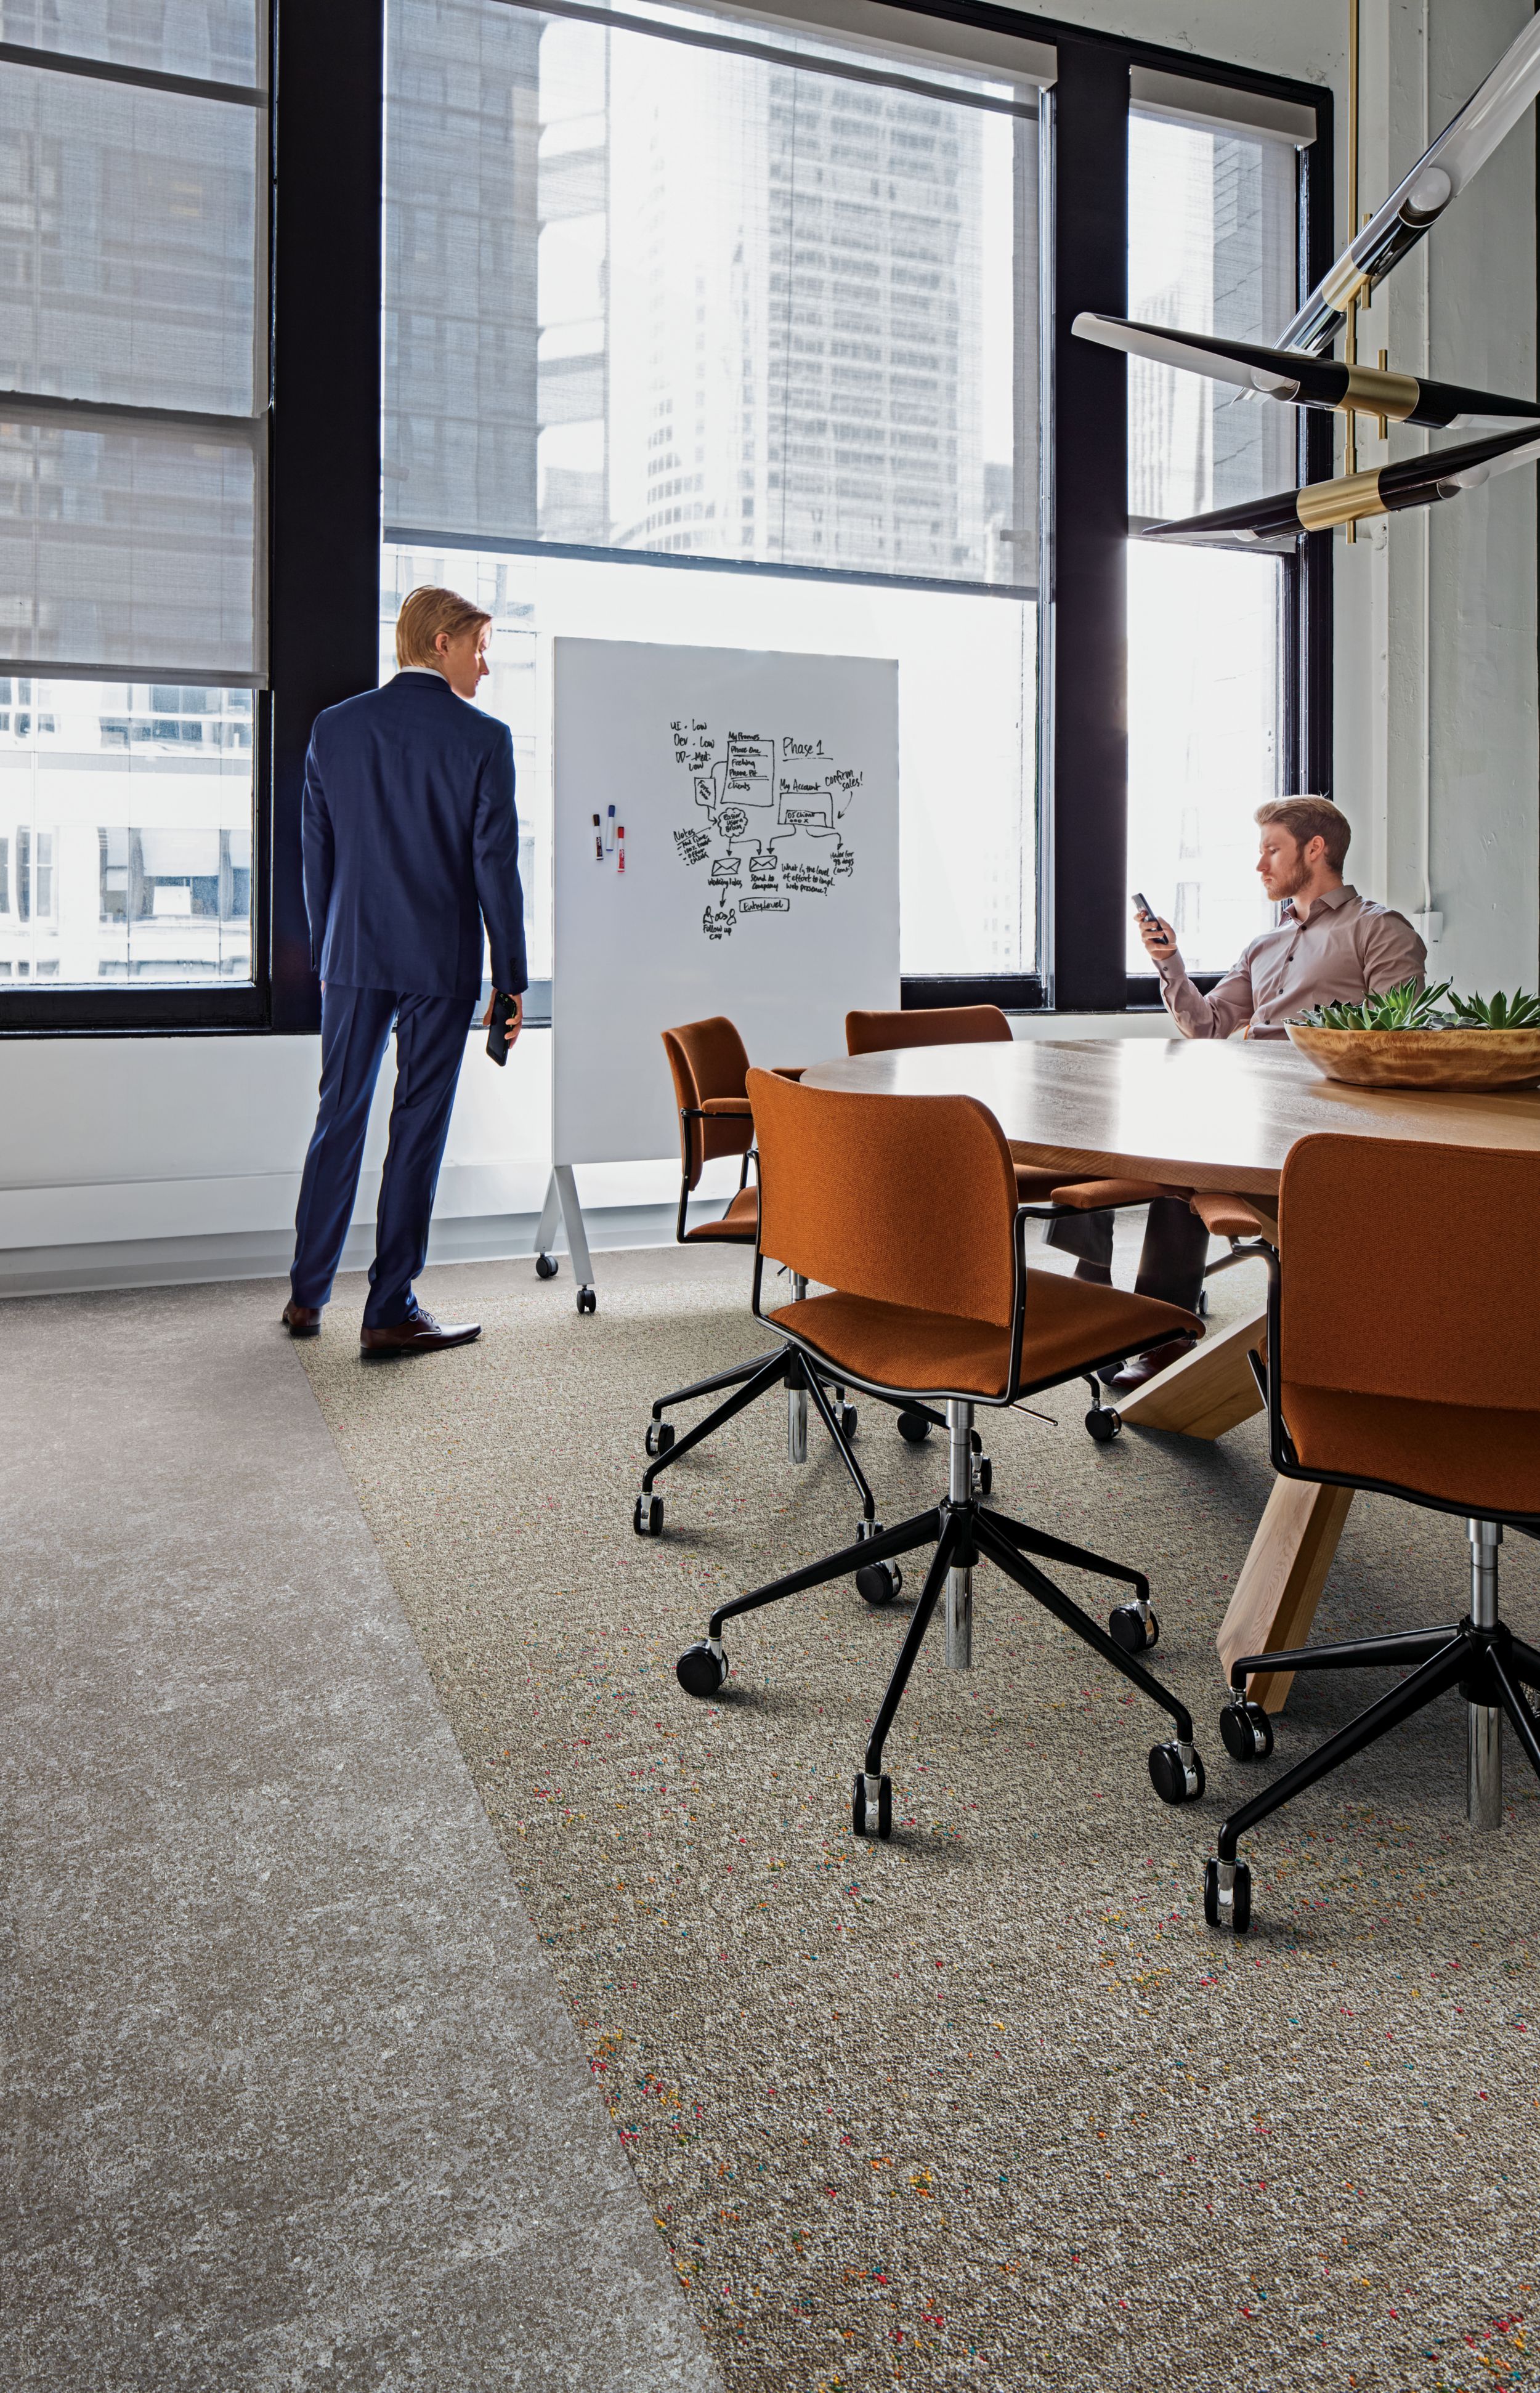 image Interface Walk of Life LVT and Step Aside carpet tile in meeting space with conference table and chairs numéro 10